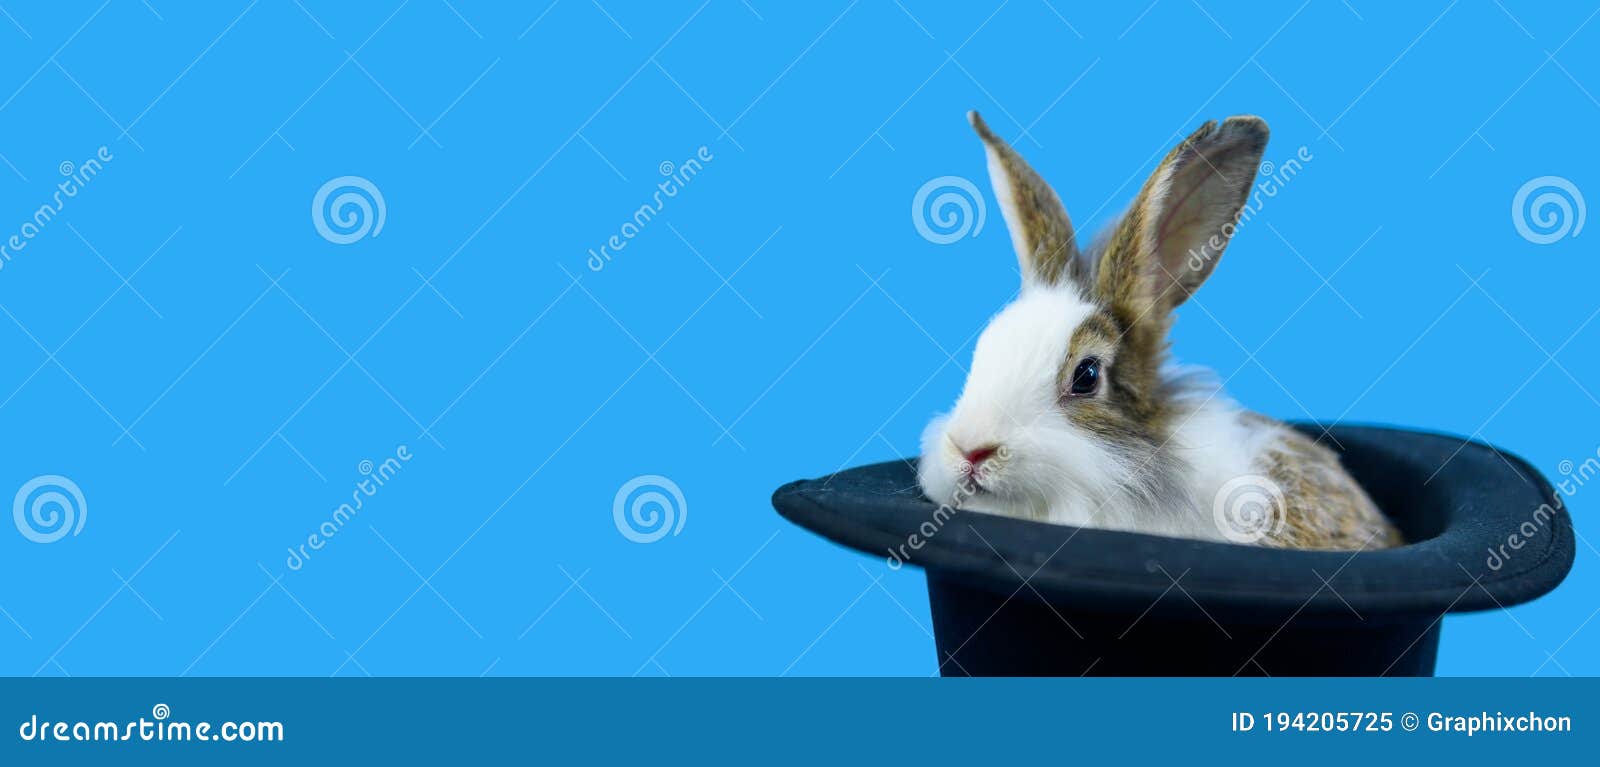 Rabbit on Blue Screen Background with Clipping Path. Spirit Animal and  Clever Pet Stock Image - Image of hair, creativity: 194205725